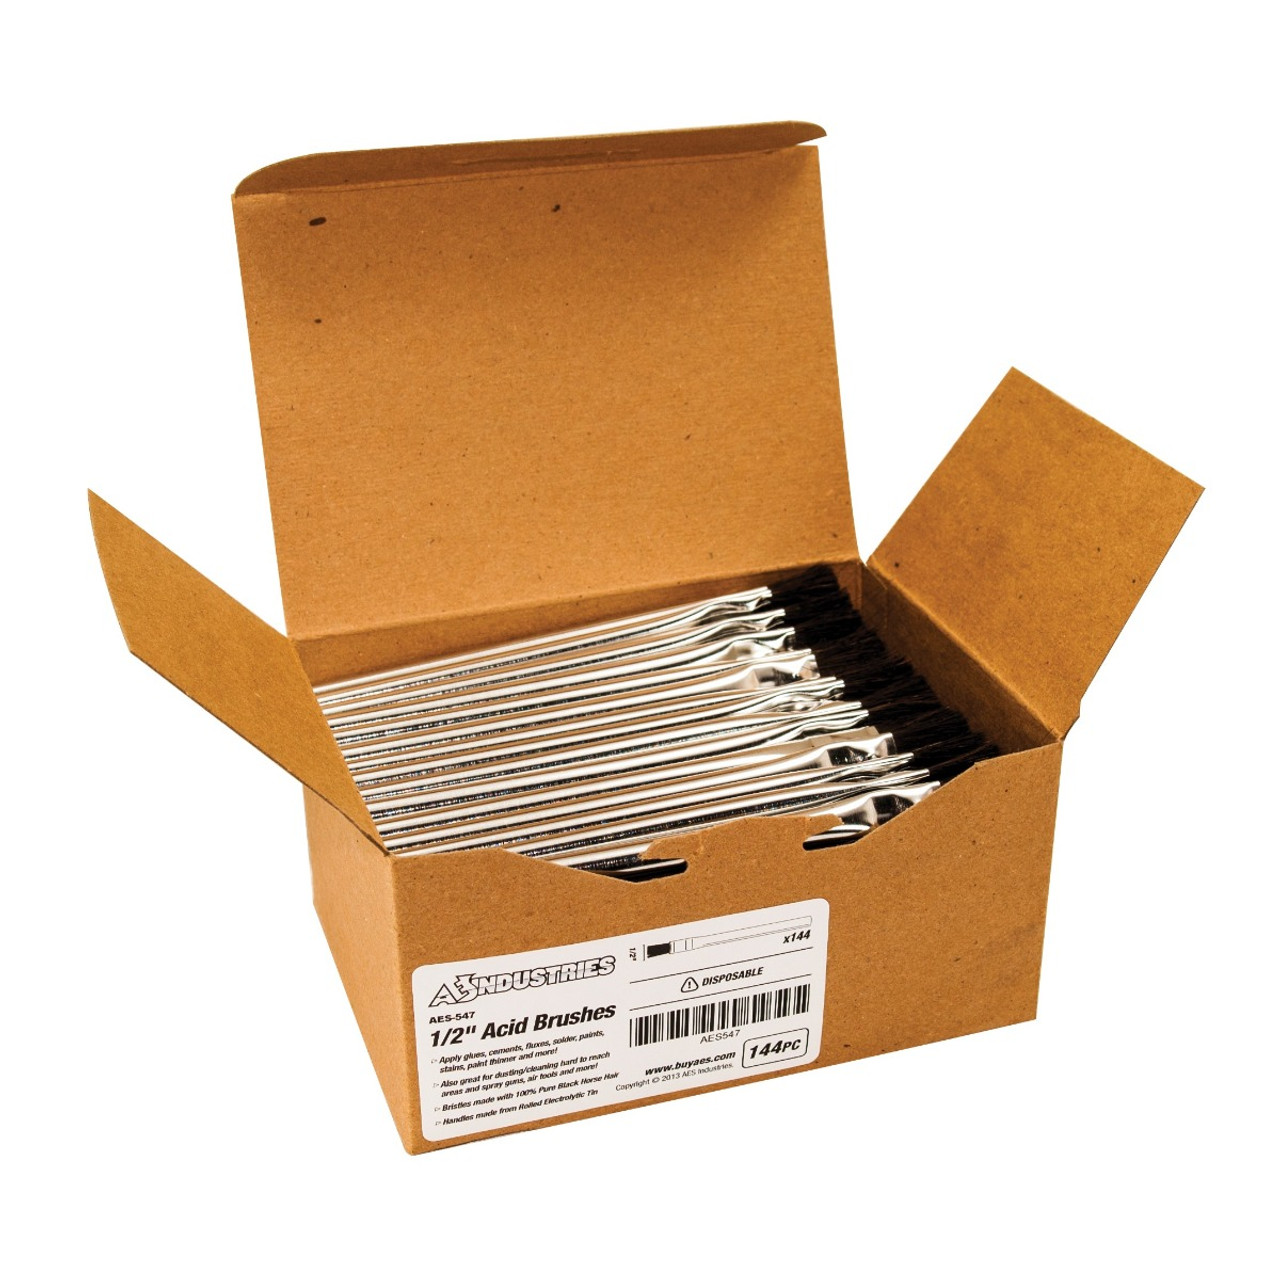 AES Industries 1/2 Acid Brushes - Made in USA (144pc)